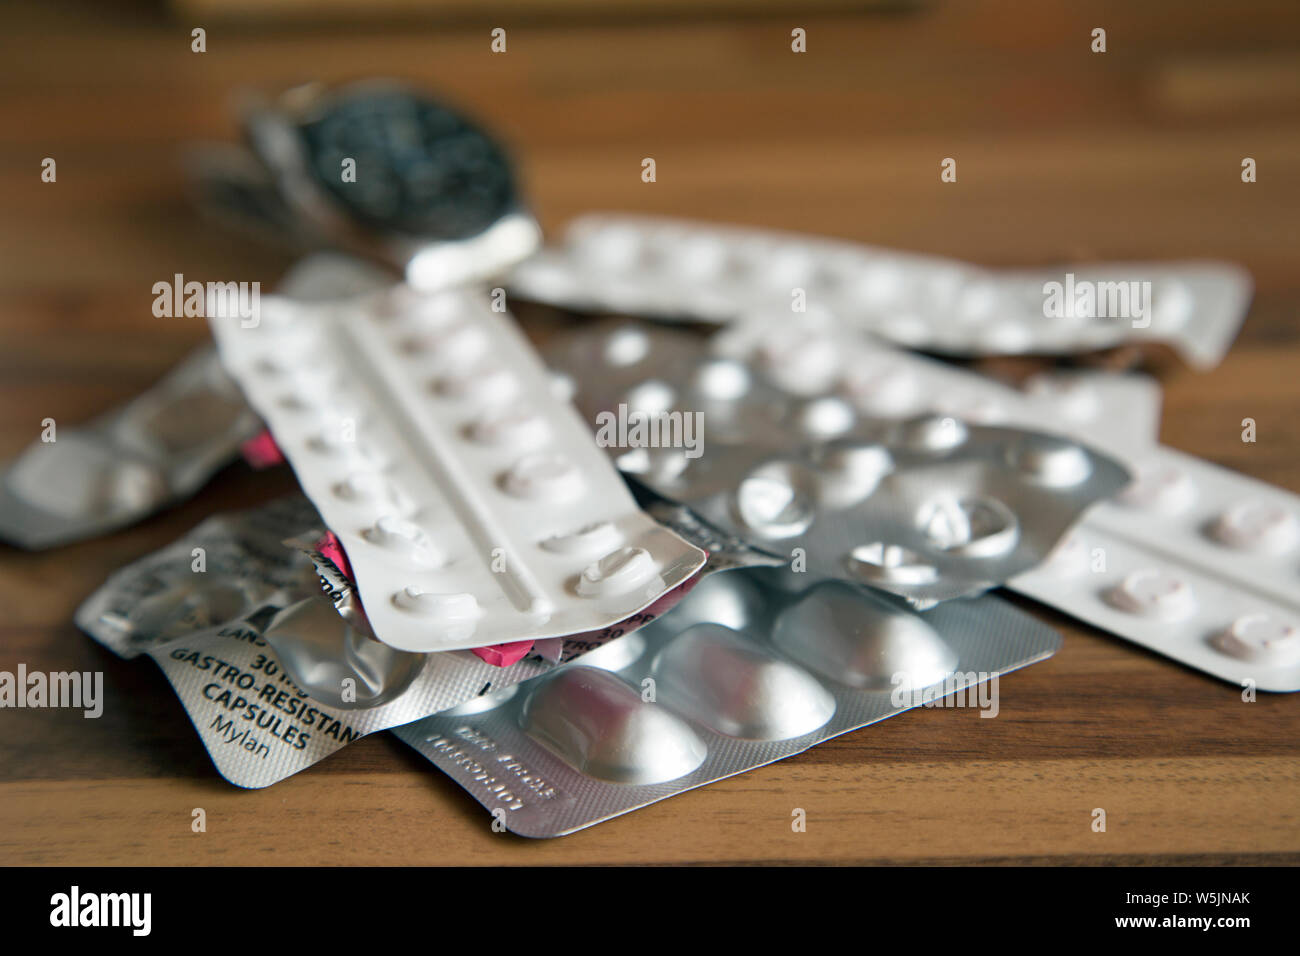 Tabletop photograph of several strips of prescription drugs with a wristwatch in the background to indicate time-sensitive dosing. Stock Photo